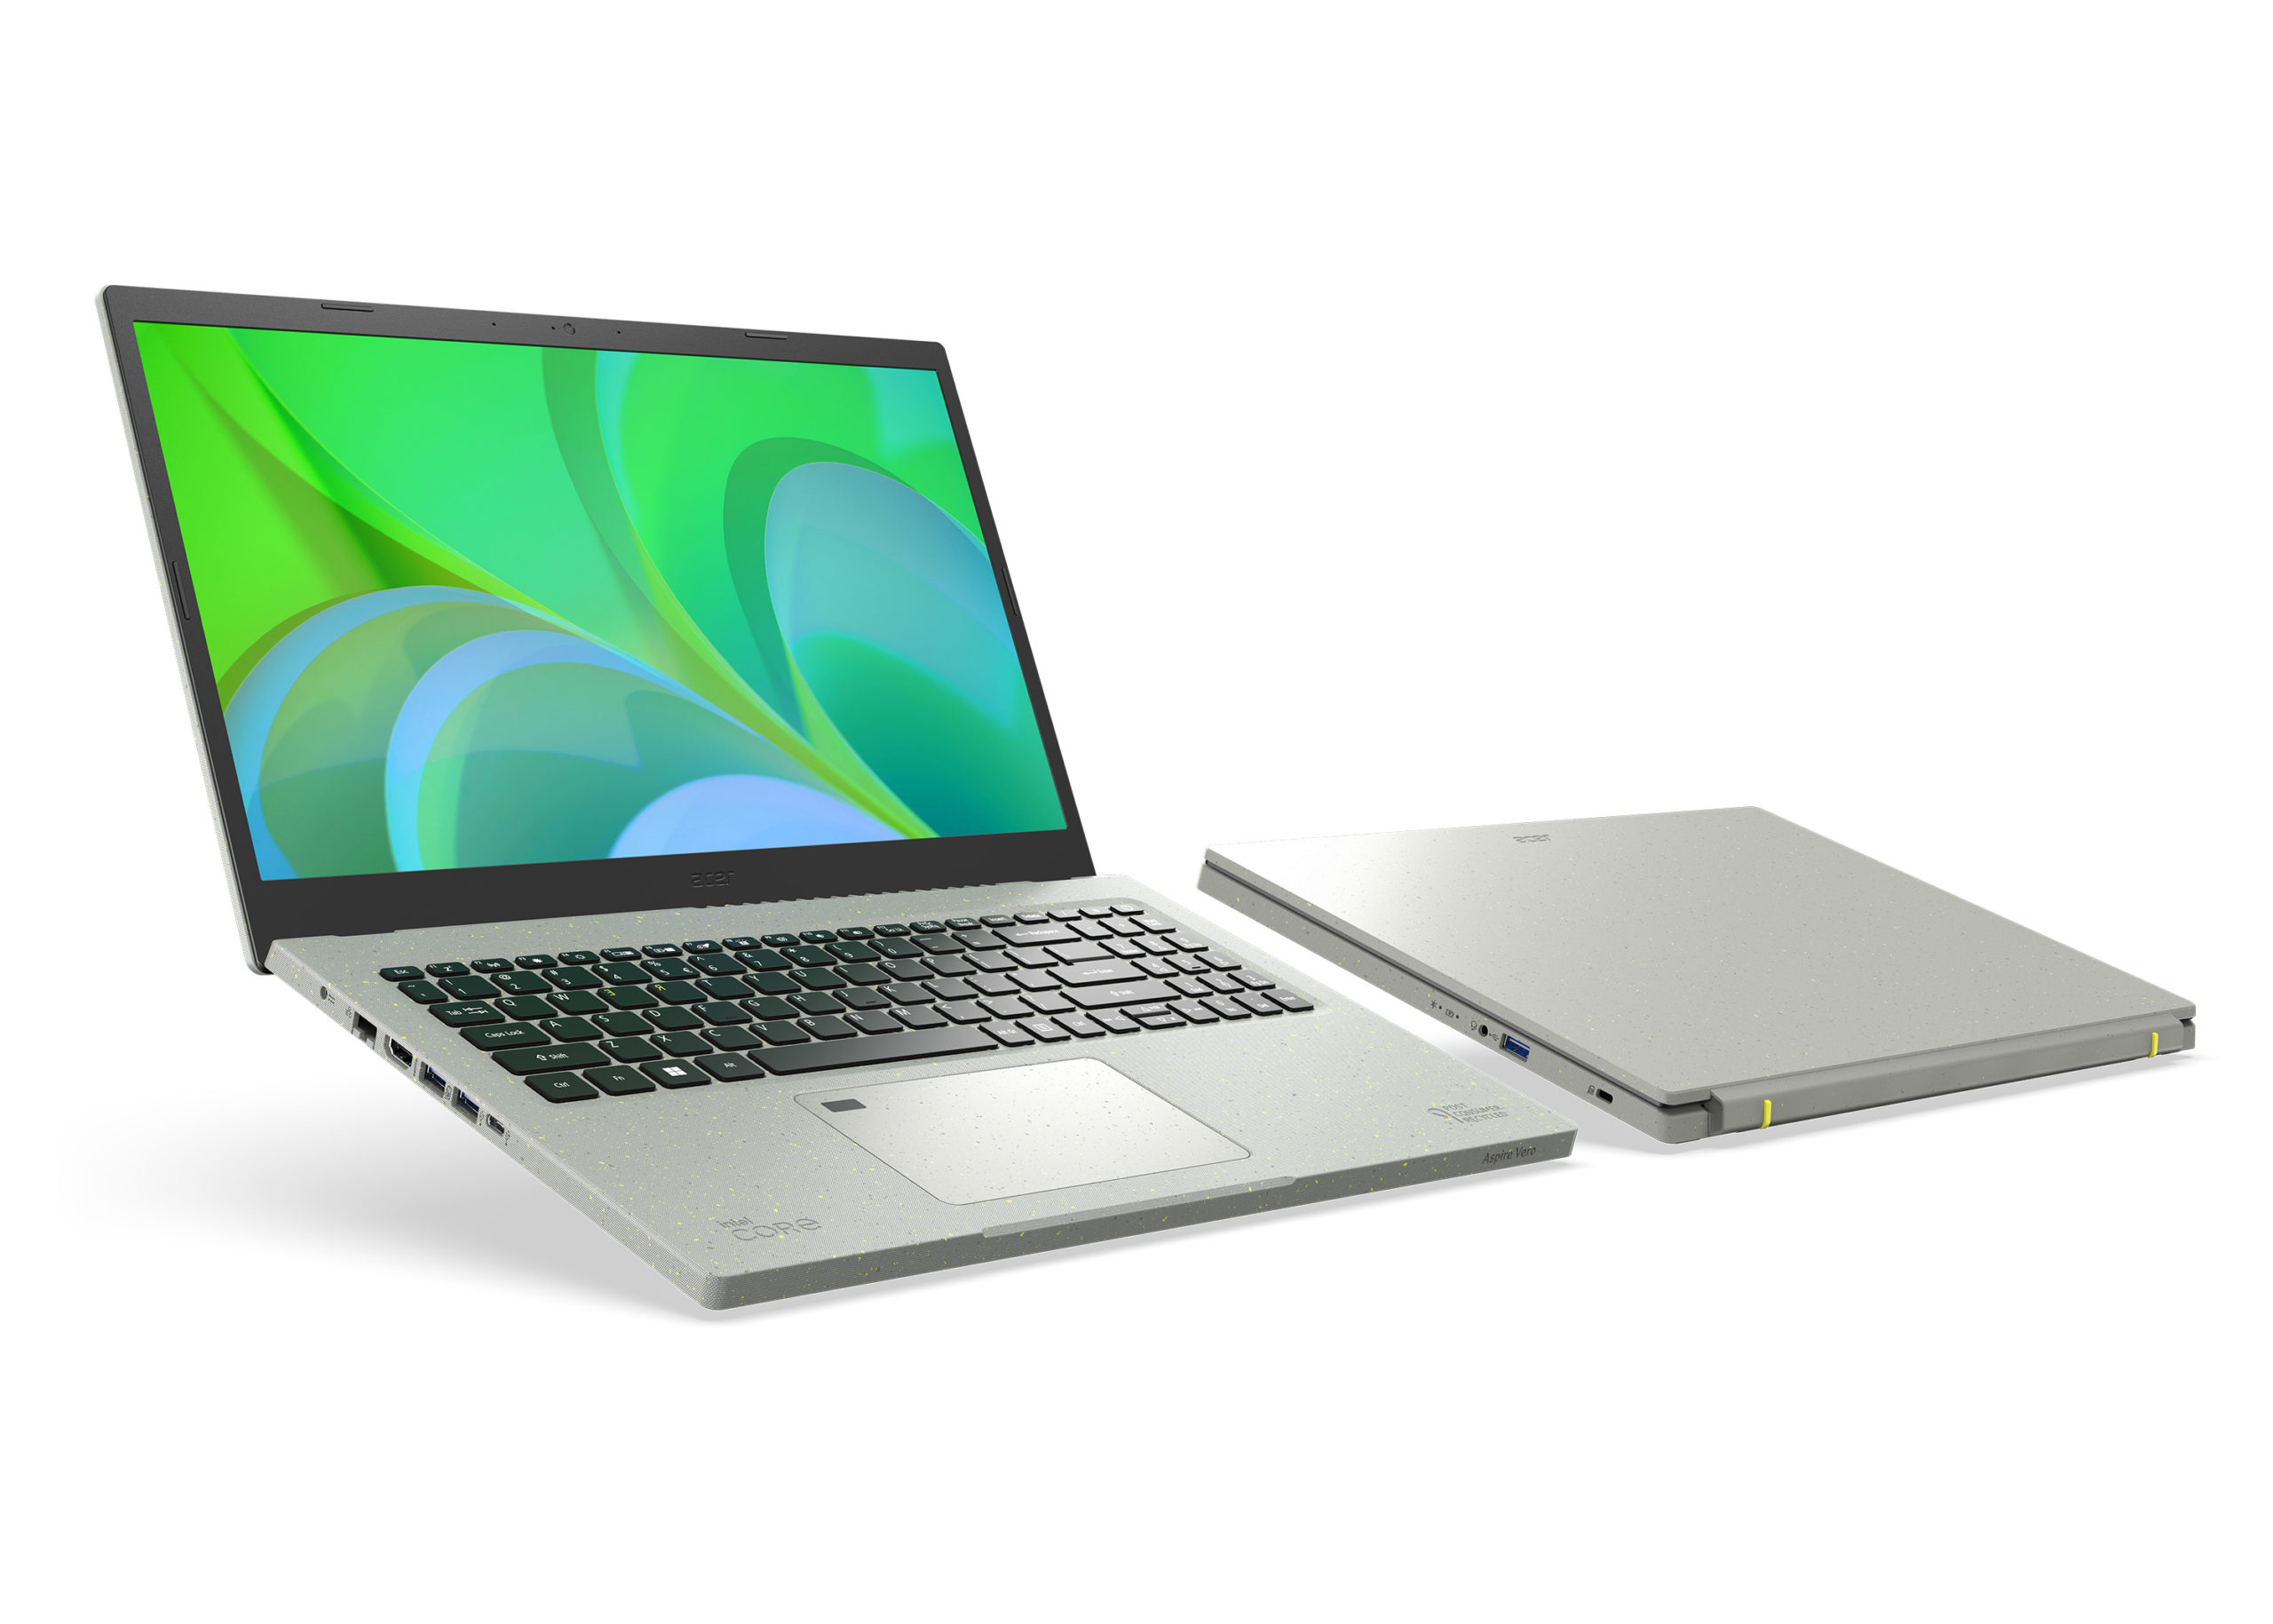 Acer Brings Its Flagship Sustainable Laptop Aspire Vero to the GCC